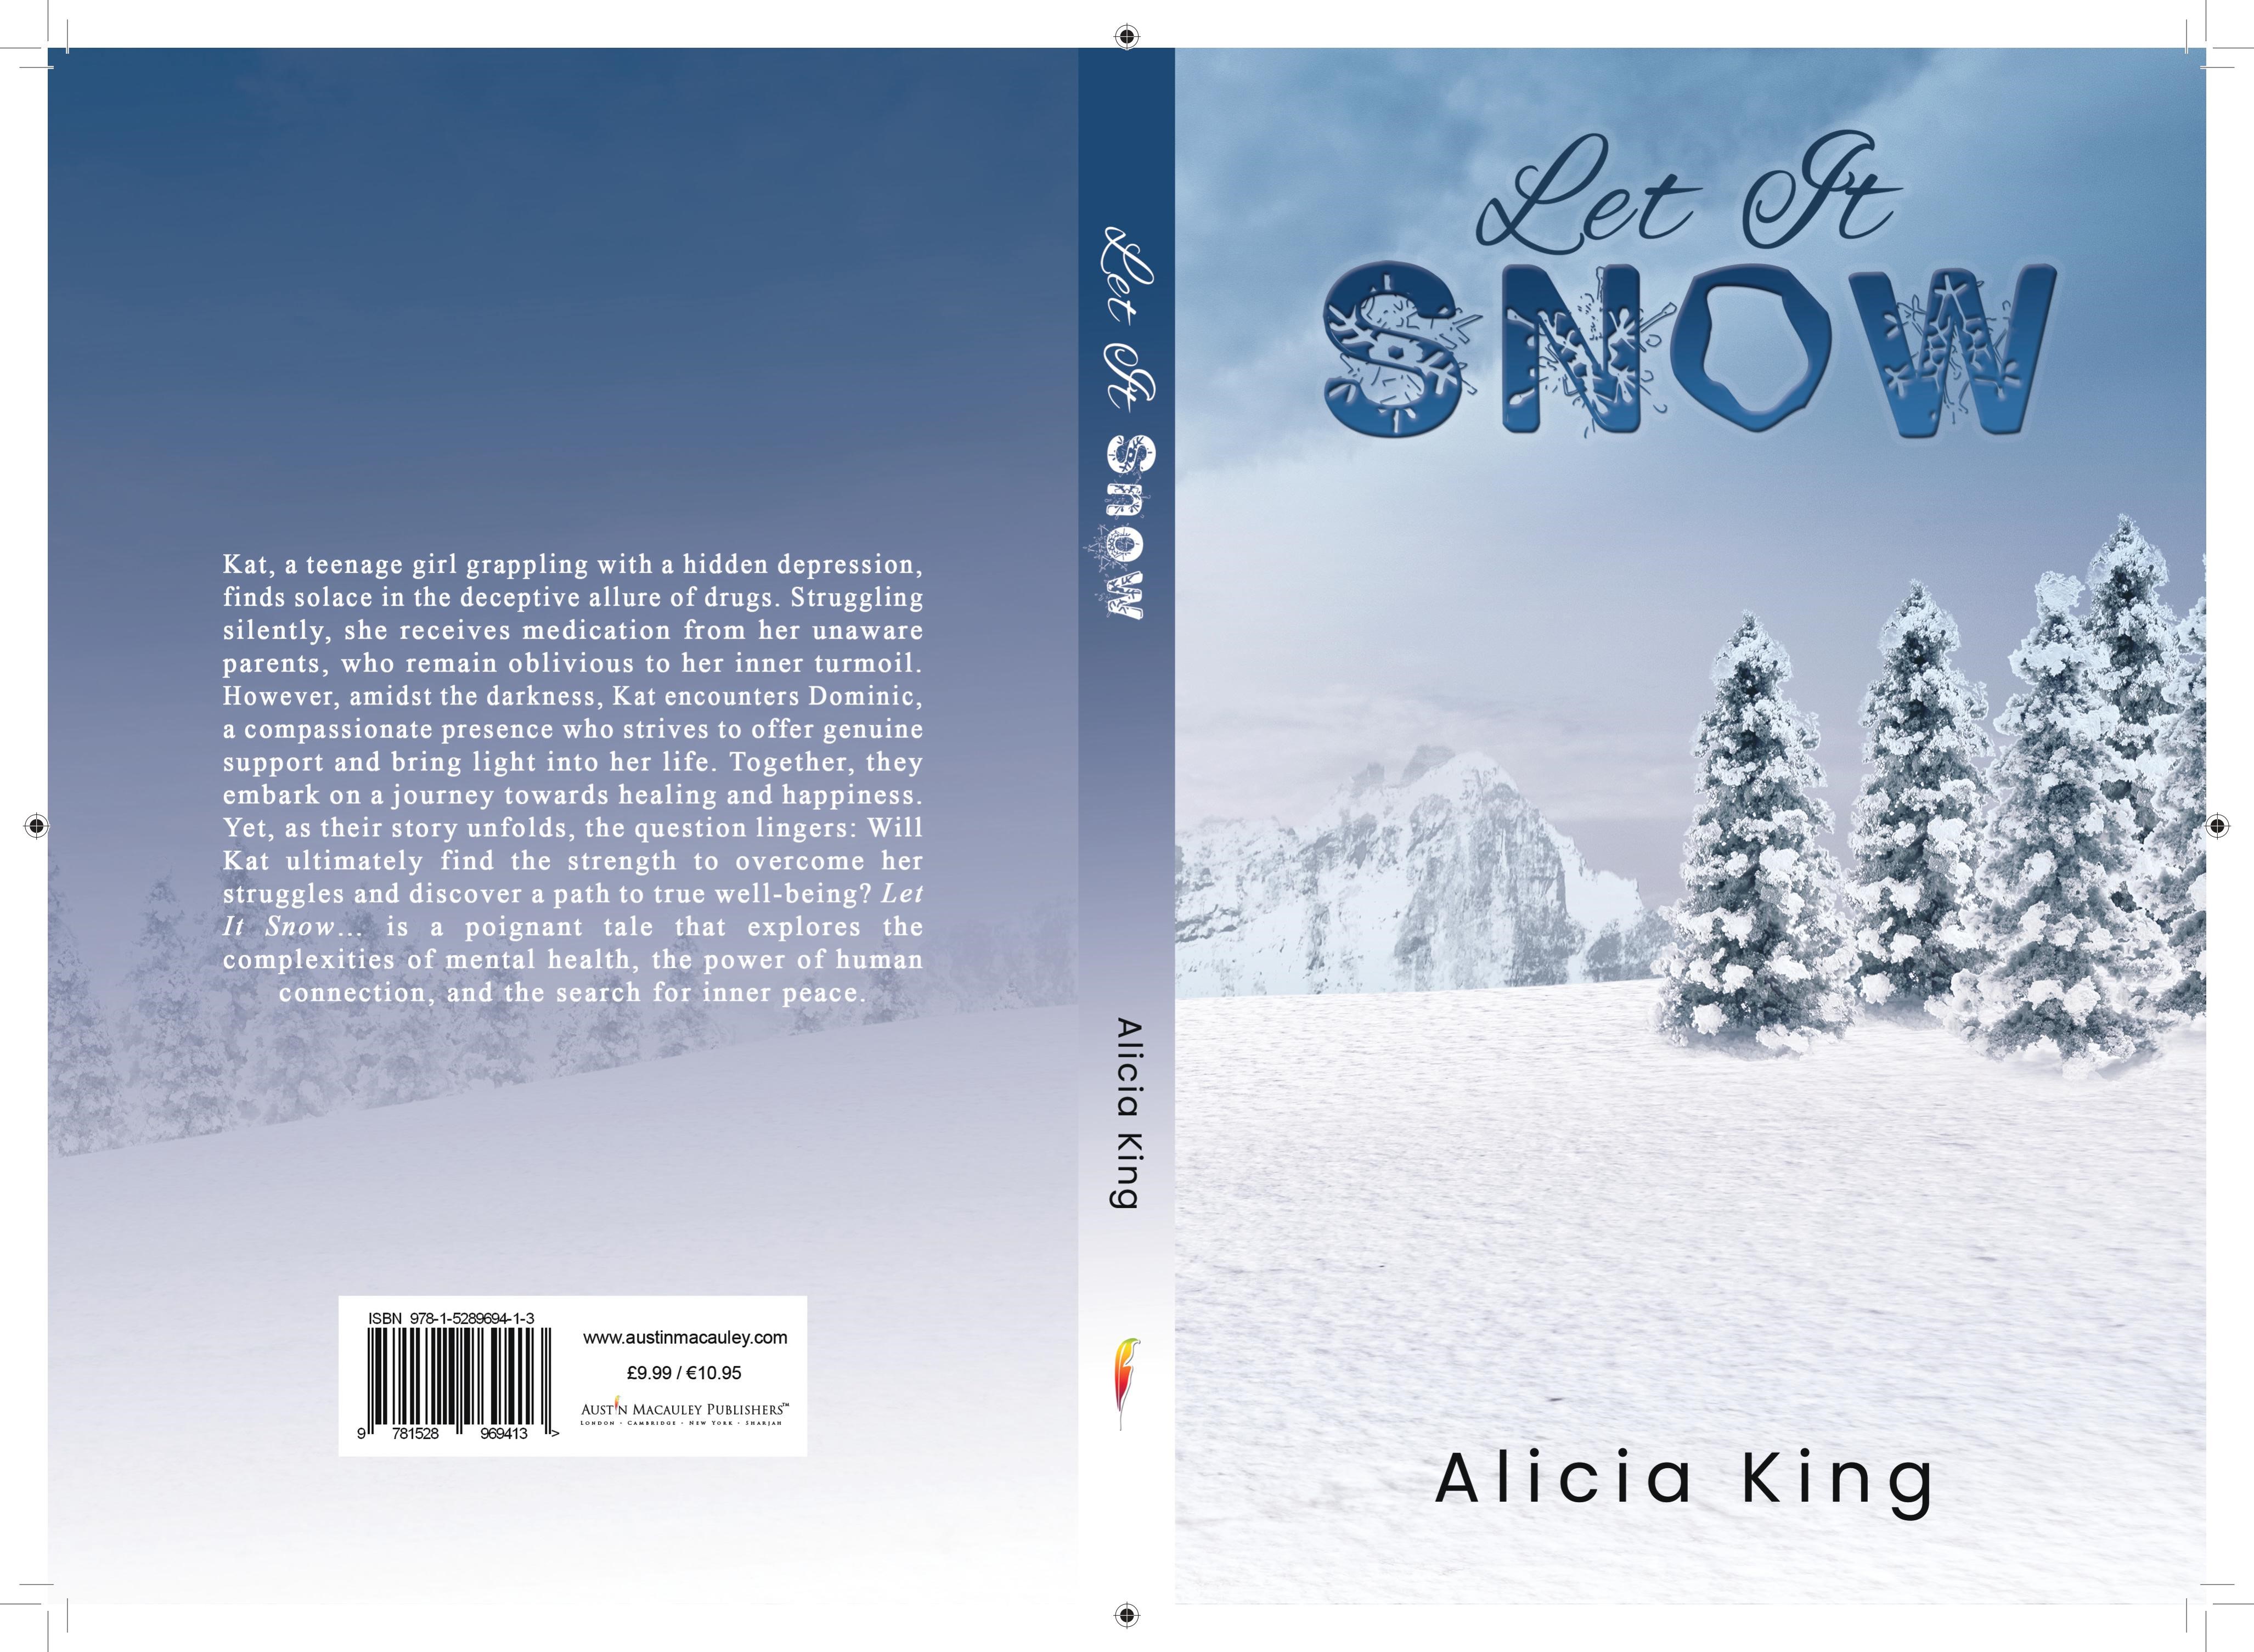 Exploring the Power of Human Connection in Resolving the Complexities of Mental Health with a New Book "Let it Snow" - by Alicia King